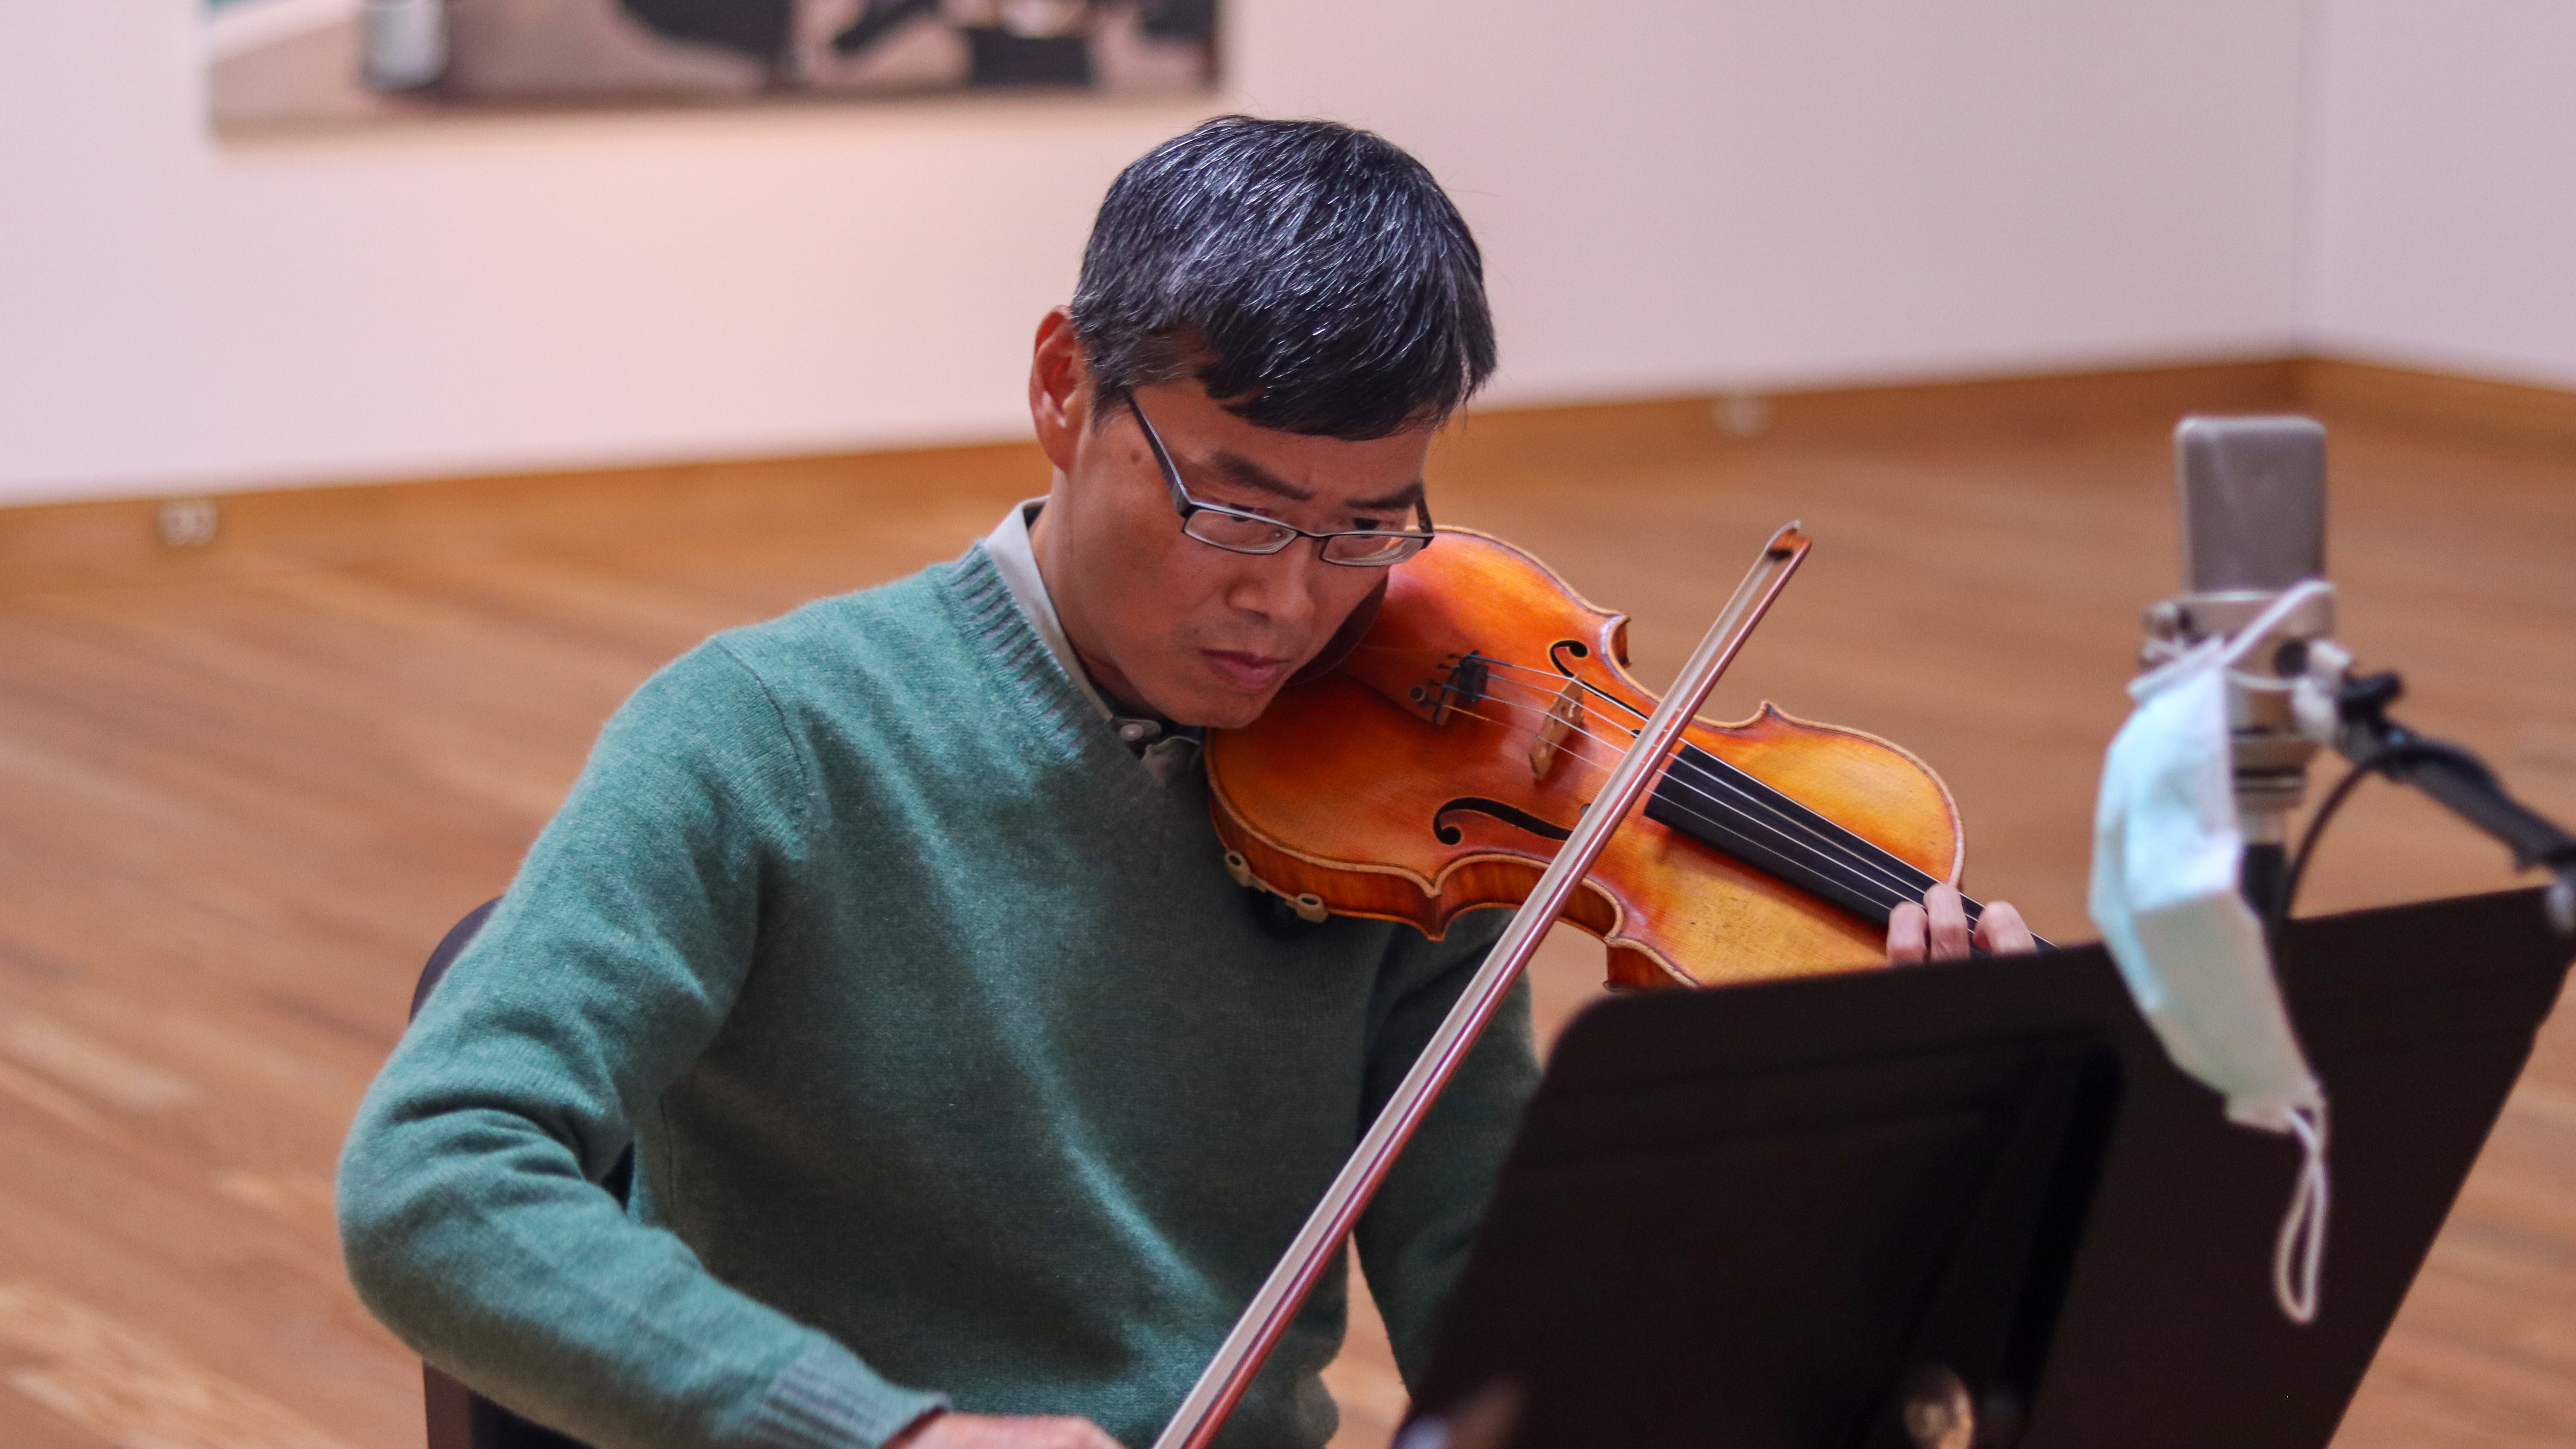 Taichi Chen tunes before performing as Violin II in “String Quartet No.2 in D Major: III. Nocturne” by Alexander Borodin in Art + Medicine: Healthy Aging.